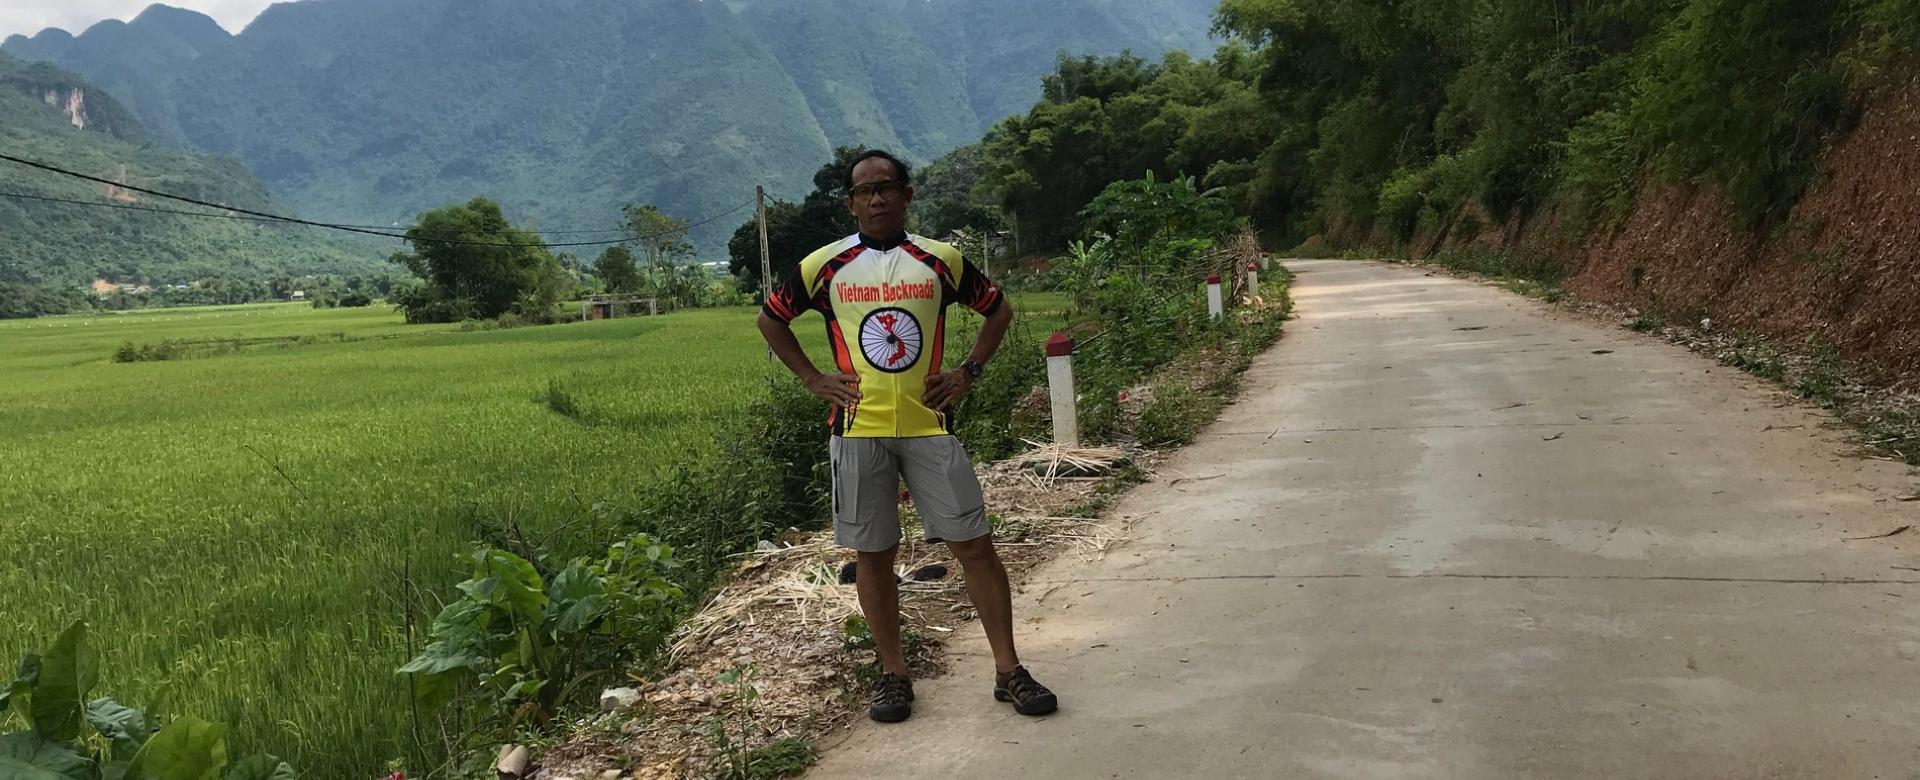 Cycling to Mai Chau, explore Hoa Binh Lake, stay a night at Thai tribe village, in the valley.